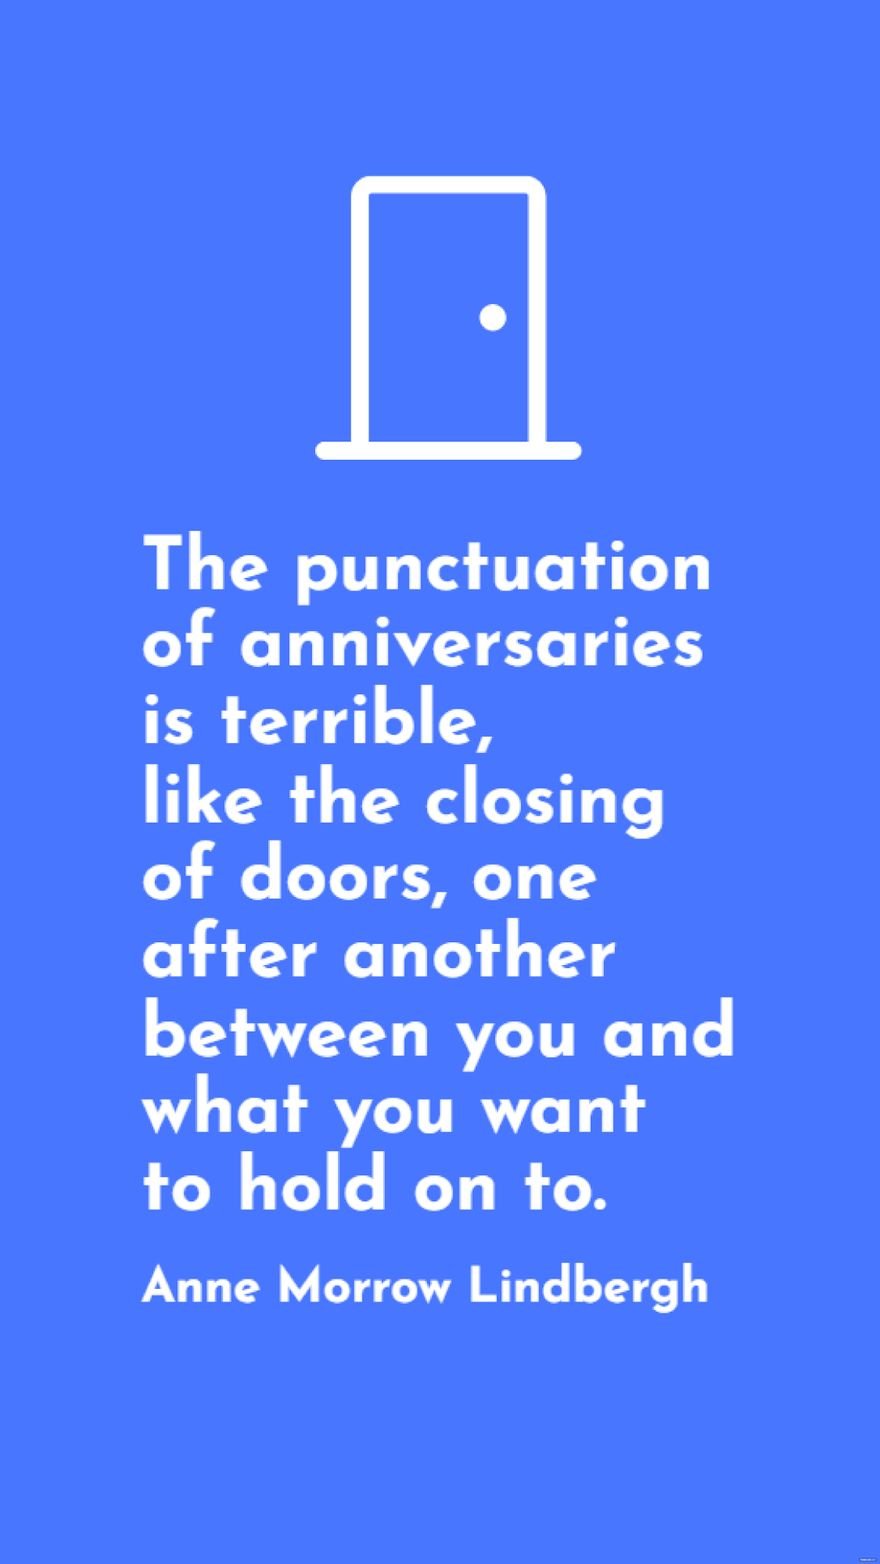 Free Anne Morrow Lindbergh - The punctuation of anniversaries is terrible, like the closing of doors, one after another between you and what you want to hold on to.